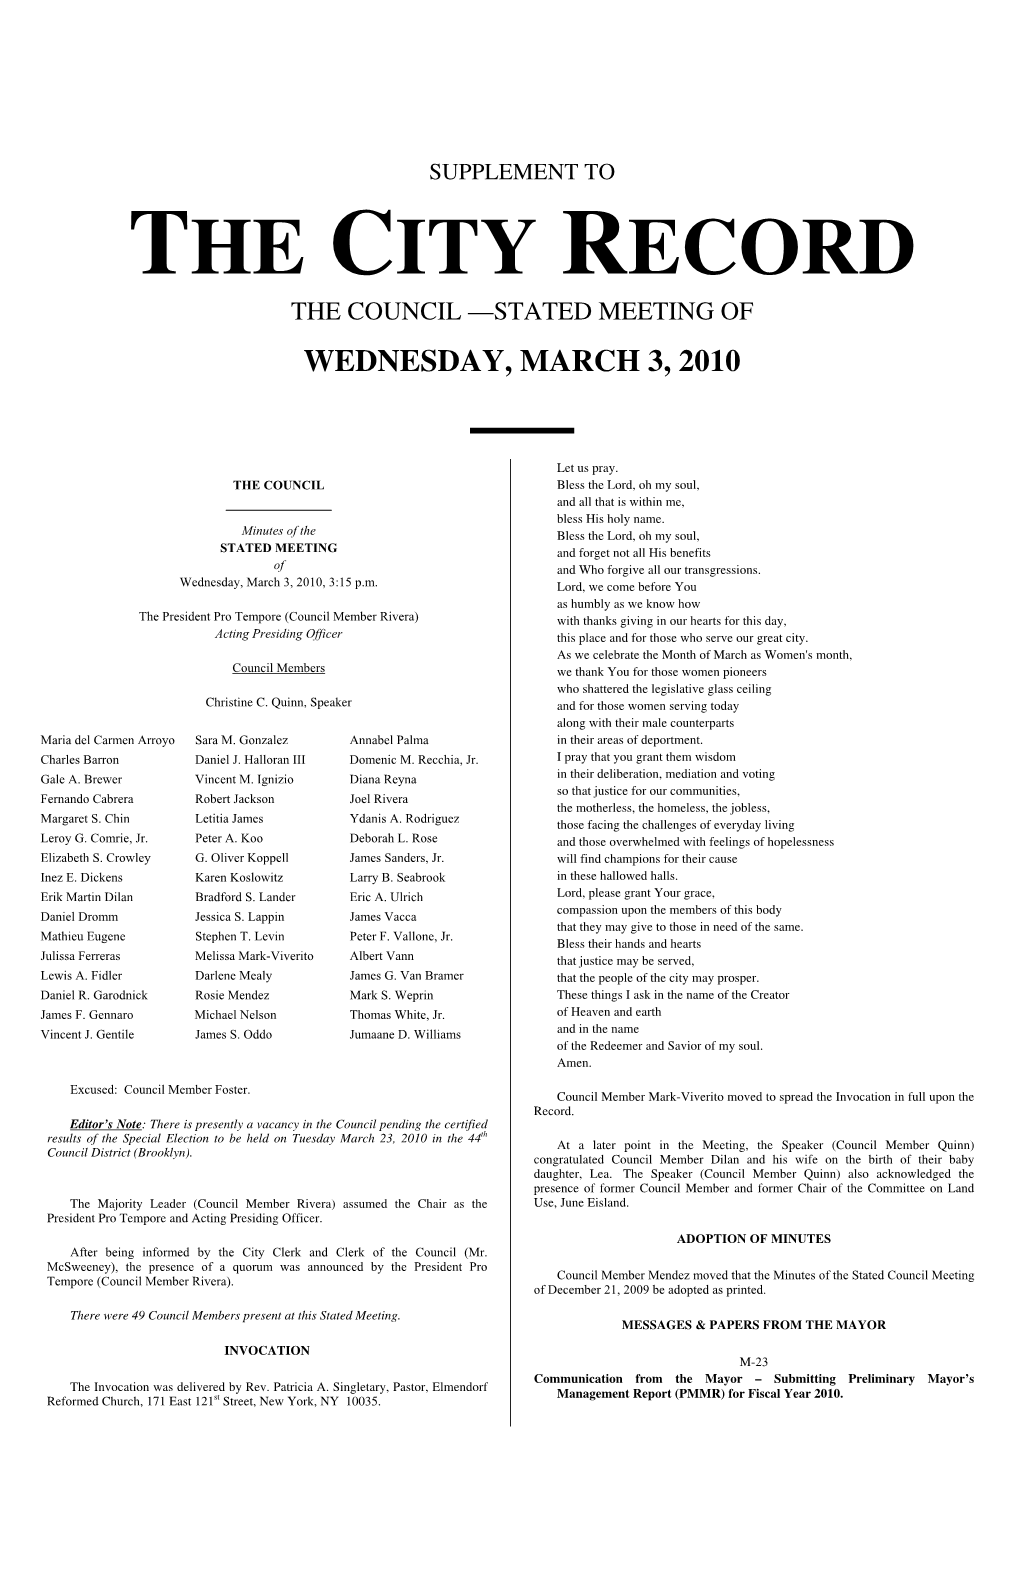 Supplement to the City Record the Council —Stated Meeting of Wednesday, March 3, 2010